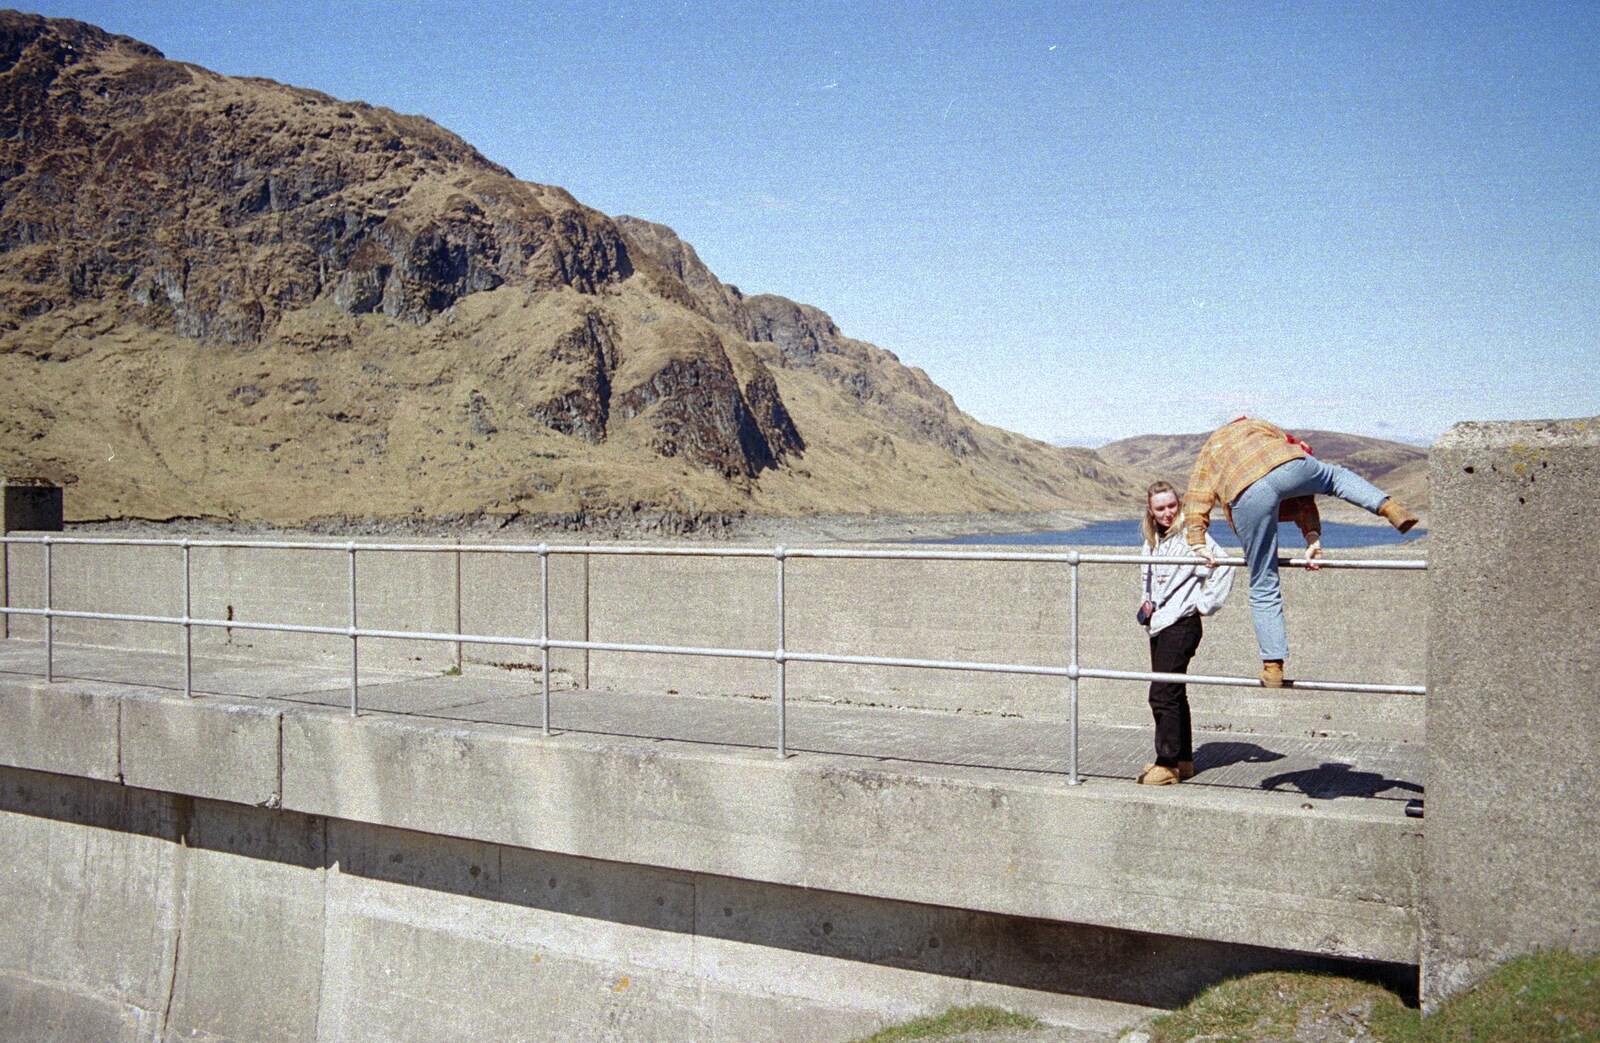 Isabelle climbs over the barrier from A Trip to Pitlochry, Scotland - 24th March 1998